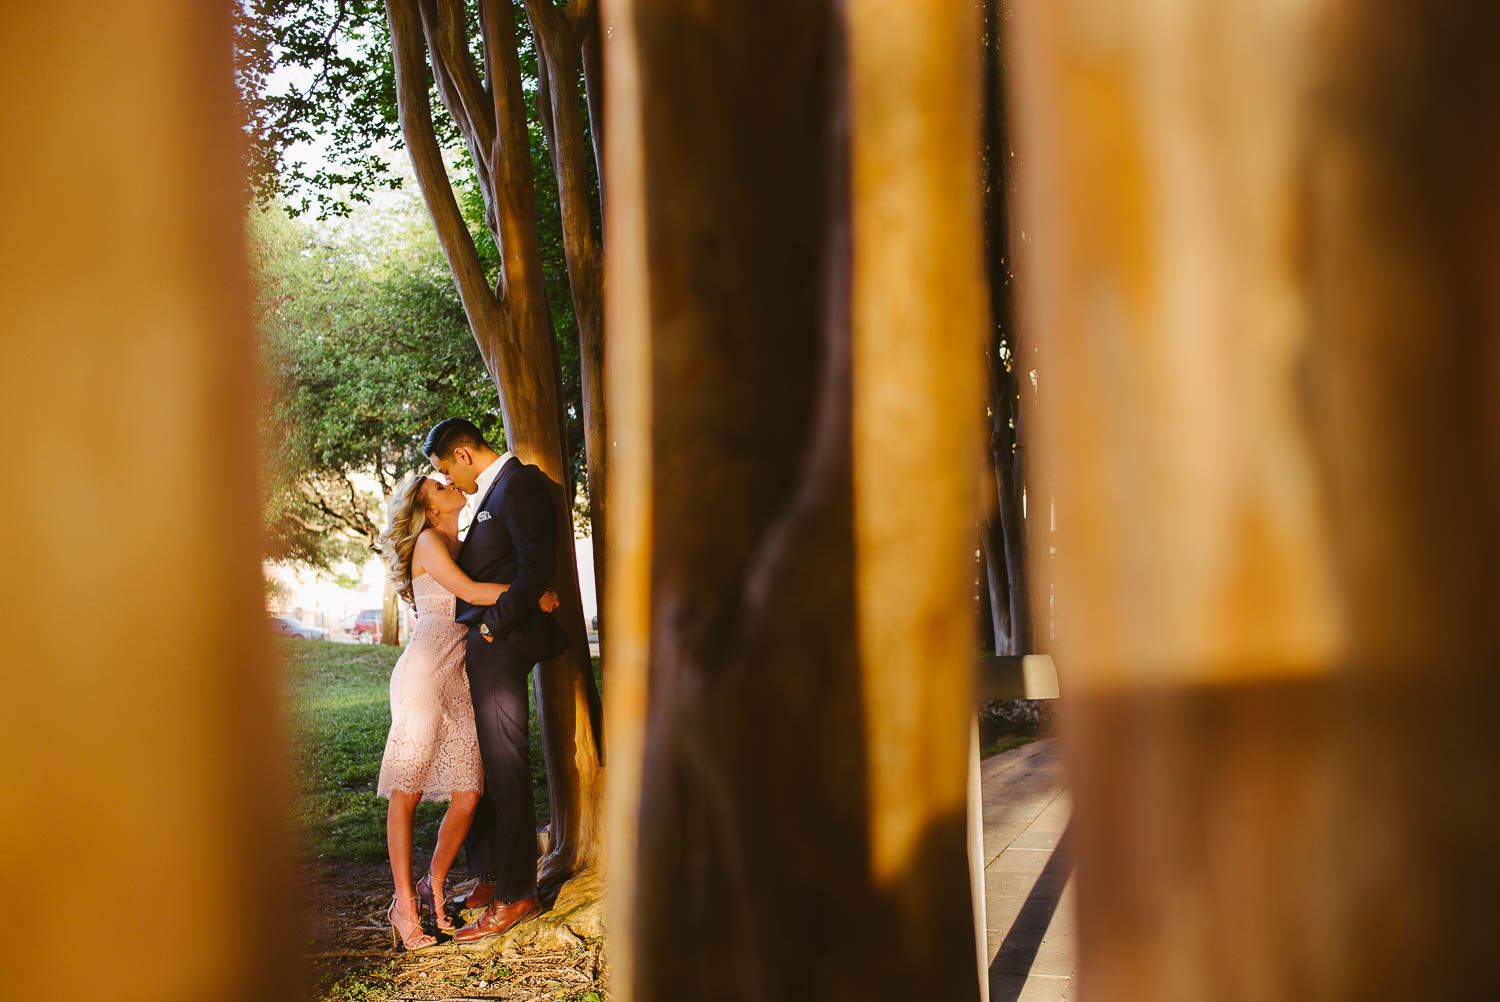 Couple downtown engagement shoot in San Antonio Texas leaning against tree